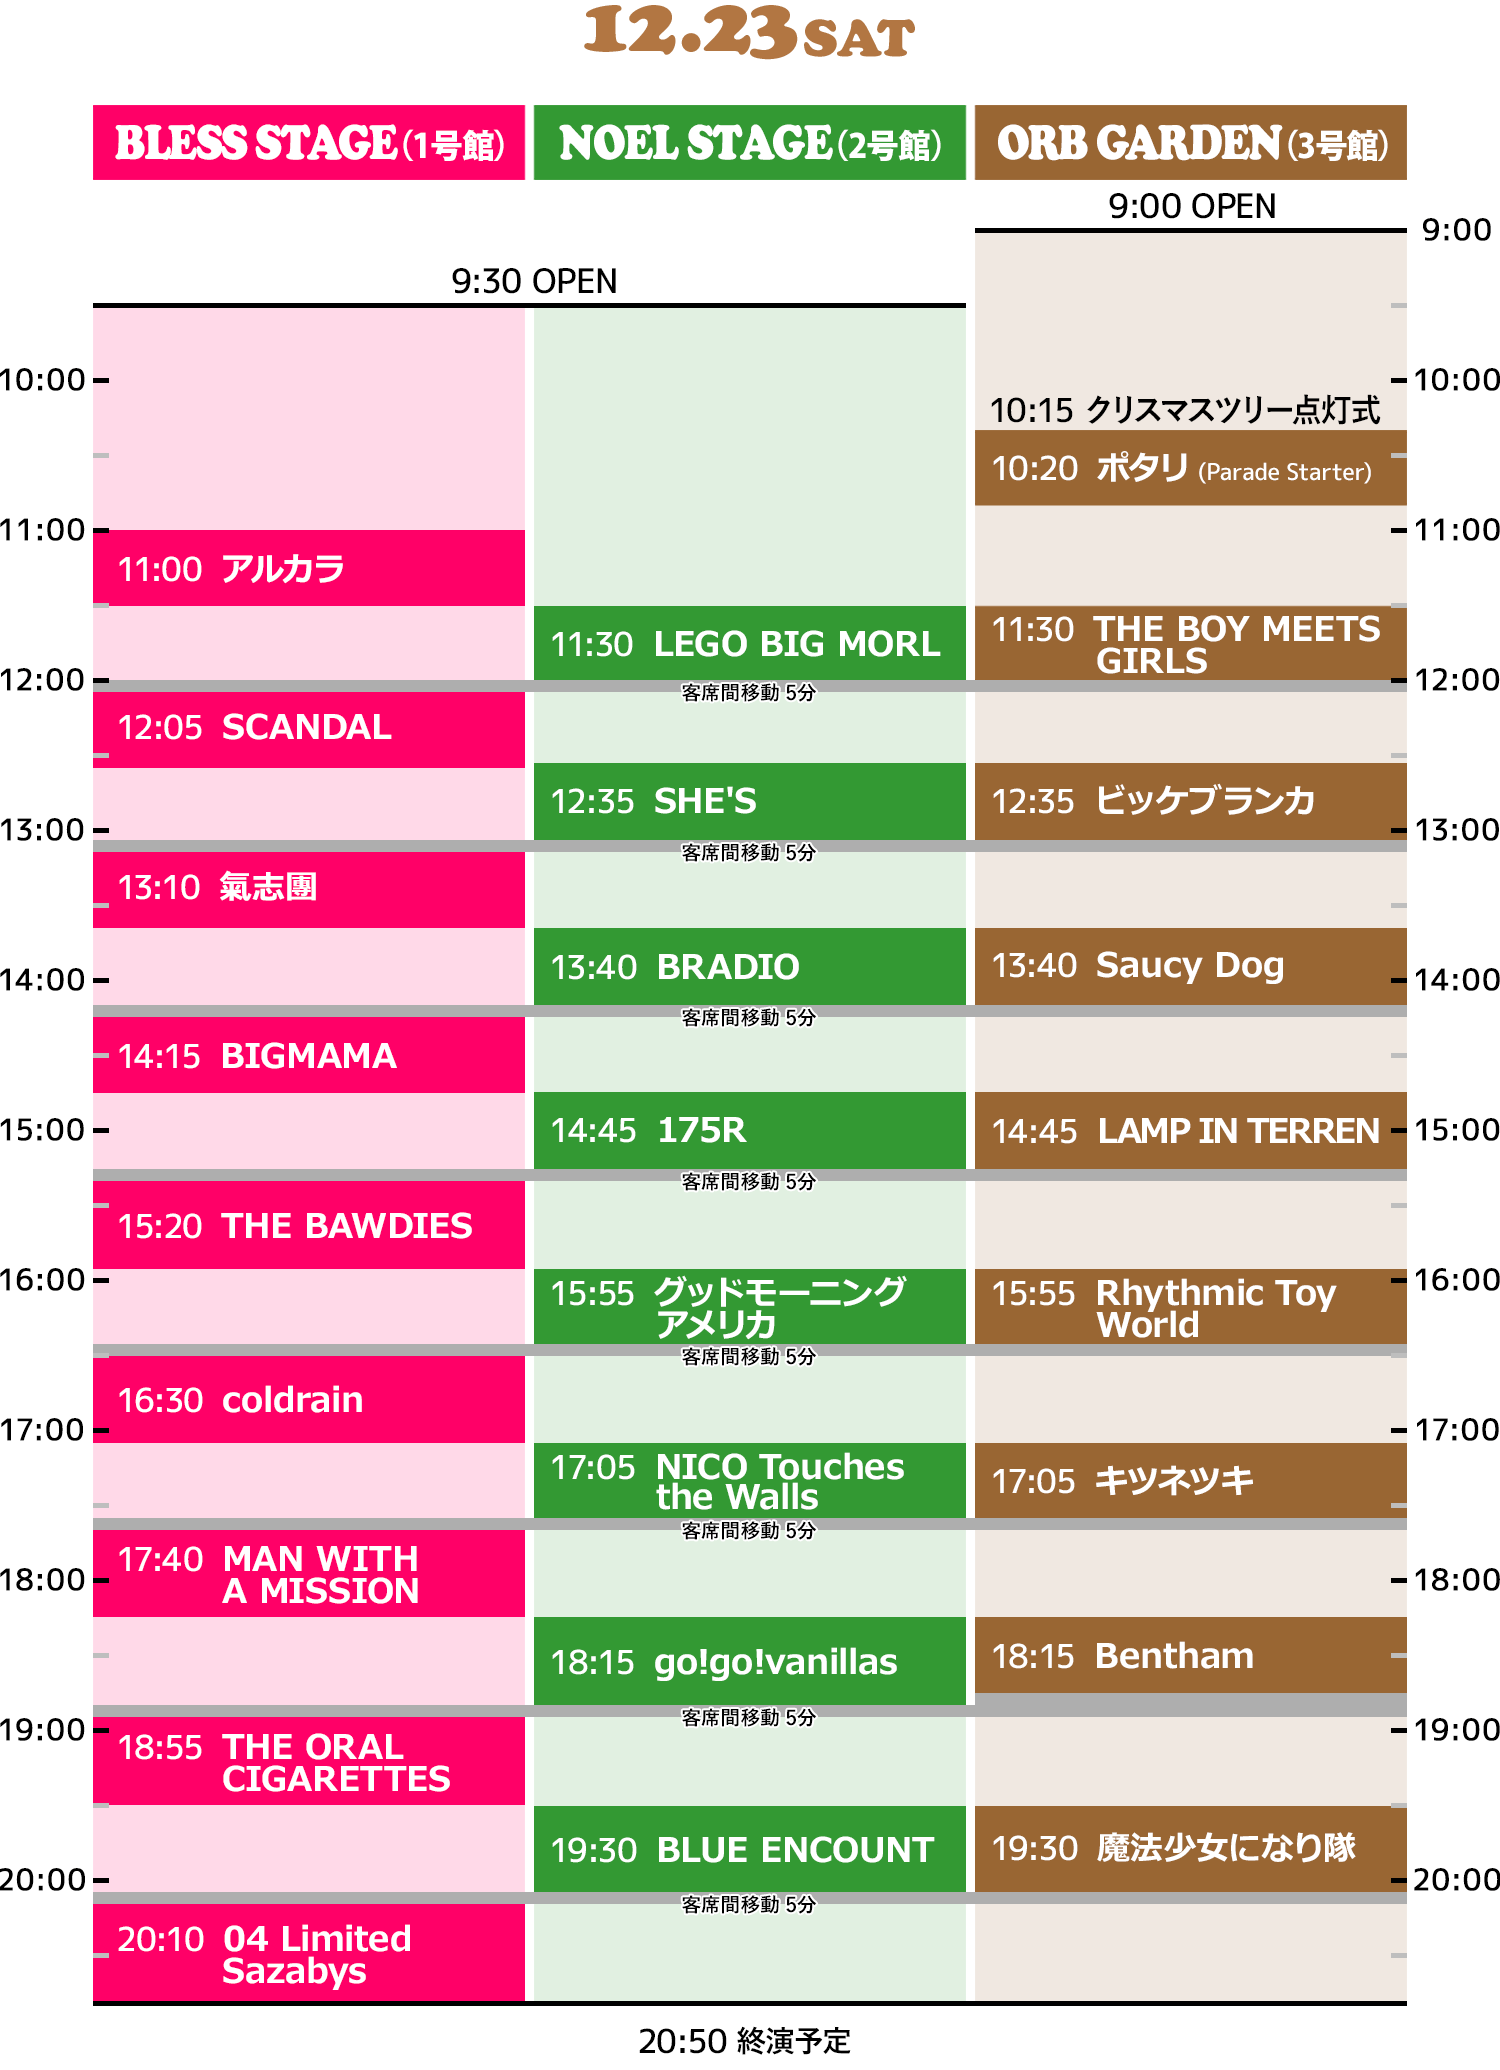 TIME TABLE 12/23